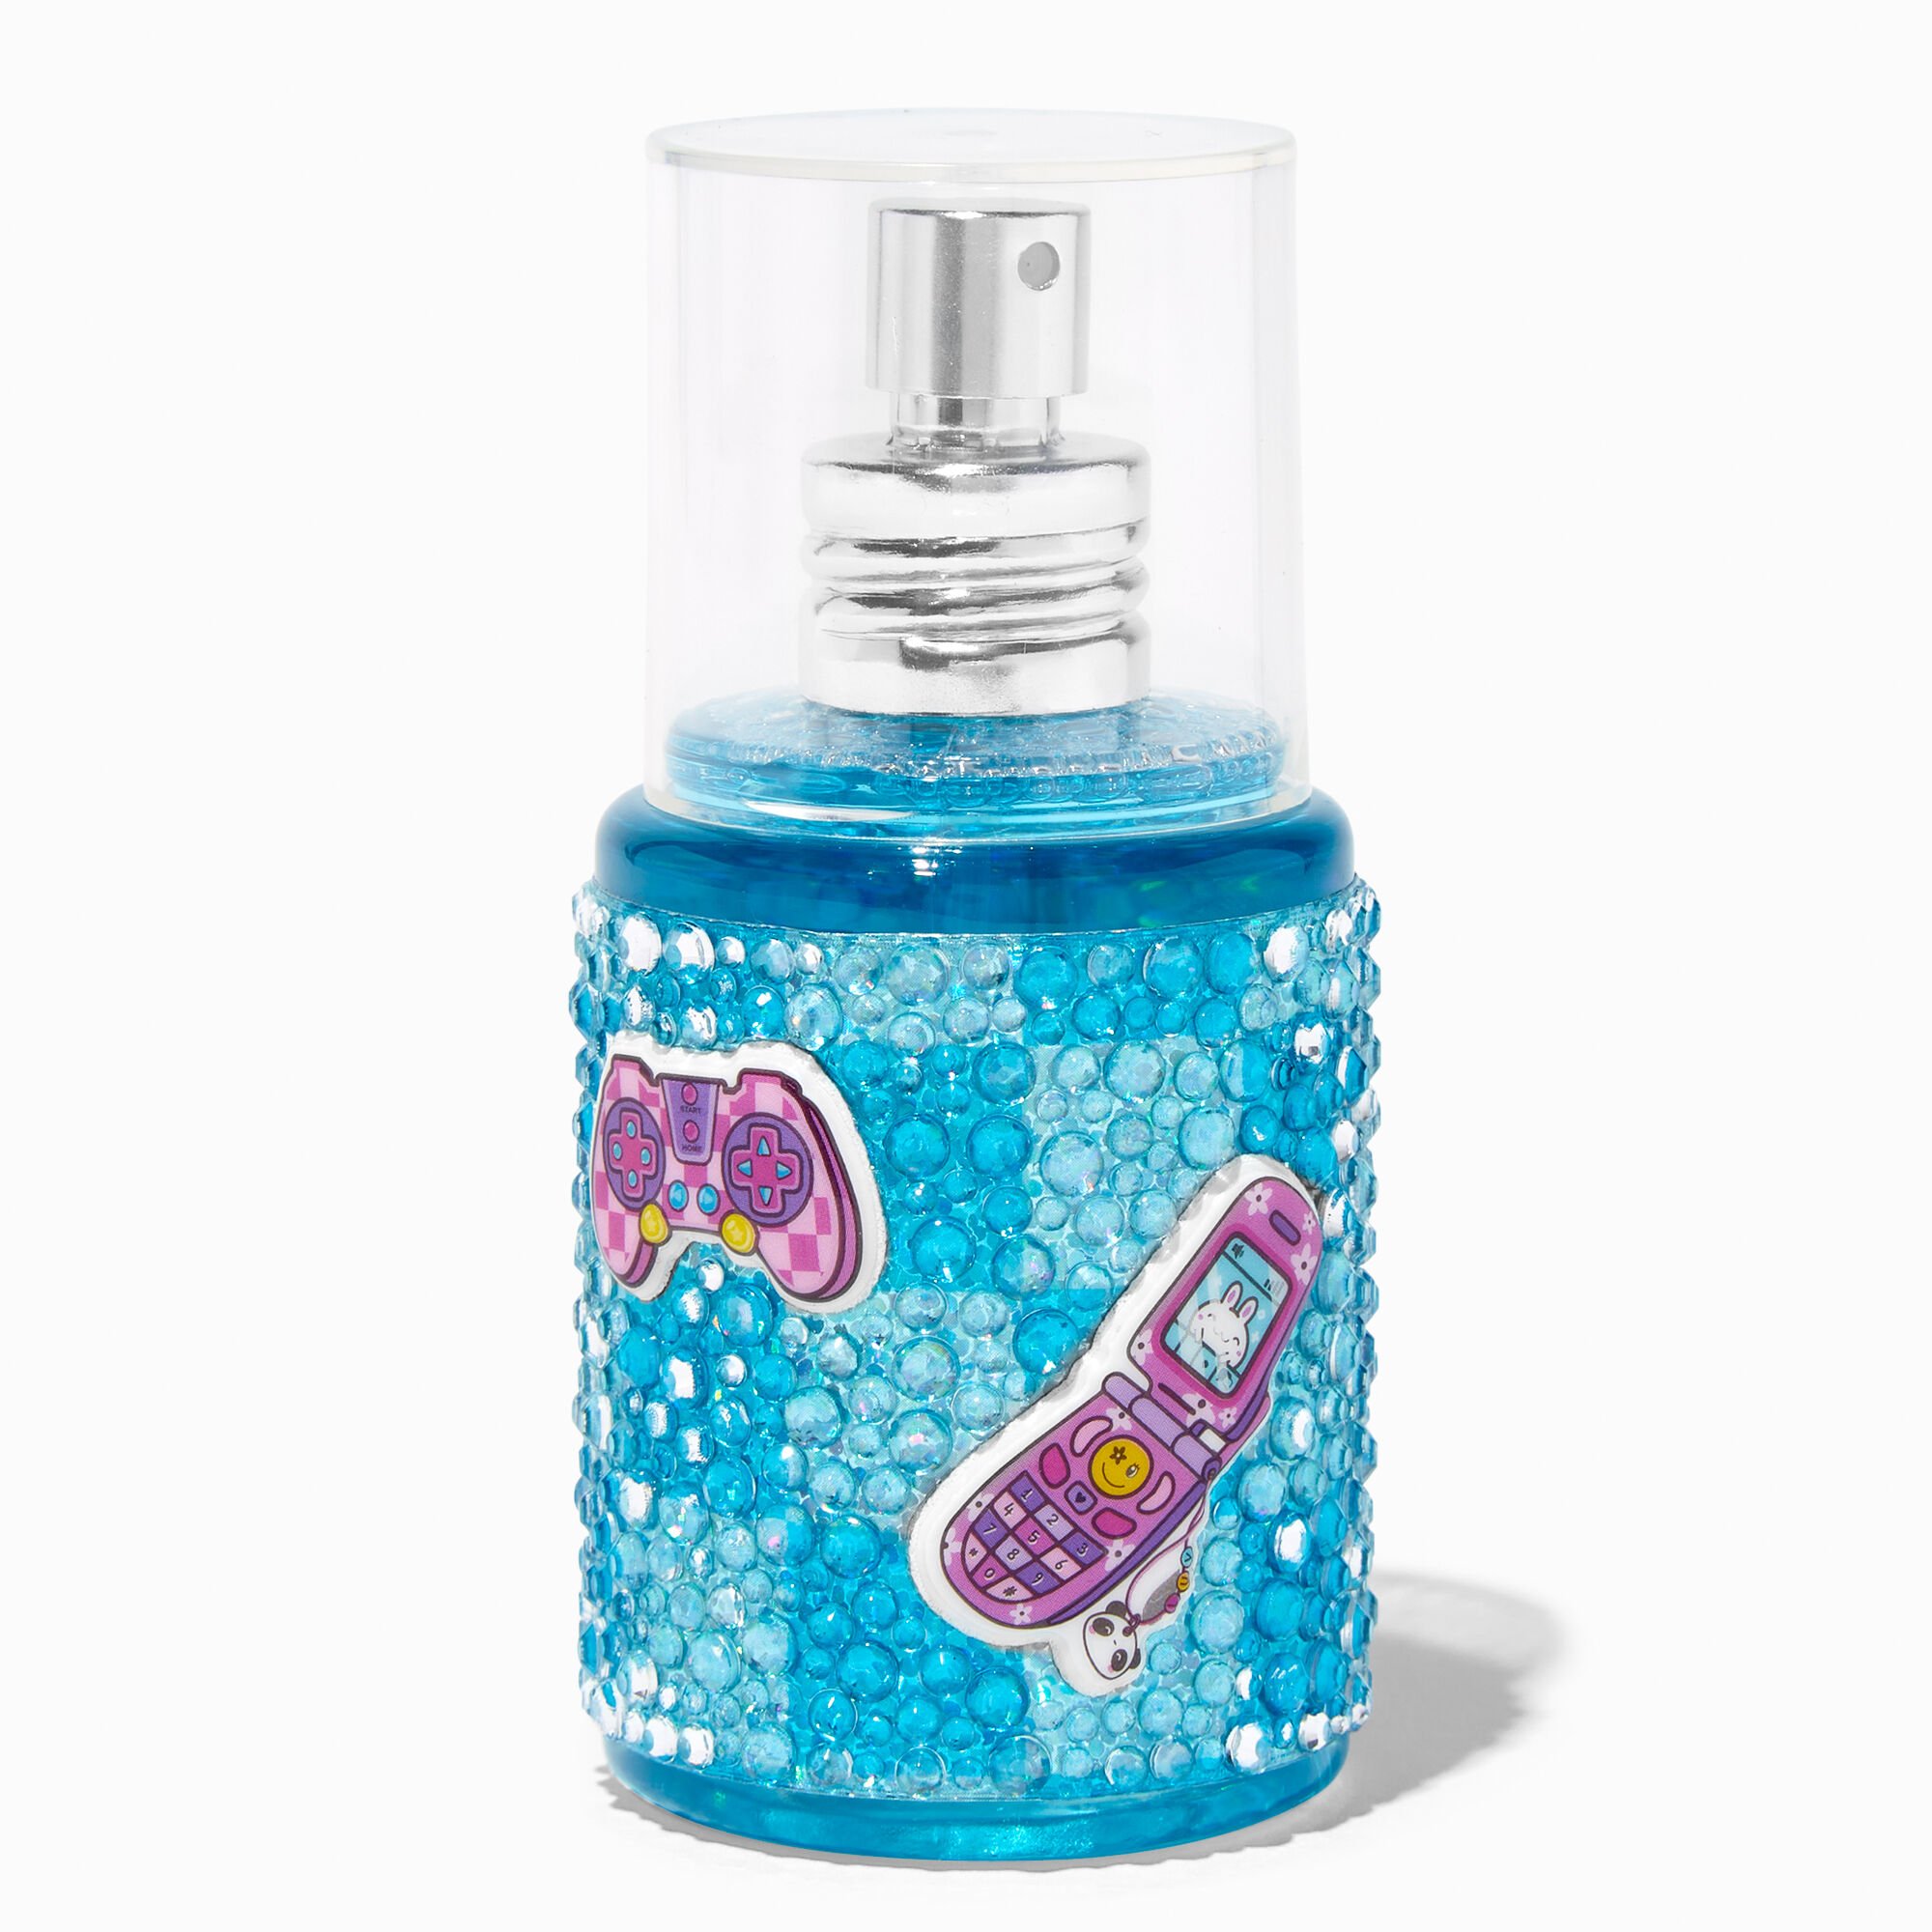 View Claires Gamer Bling Body Spray information